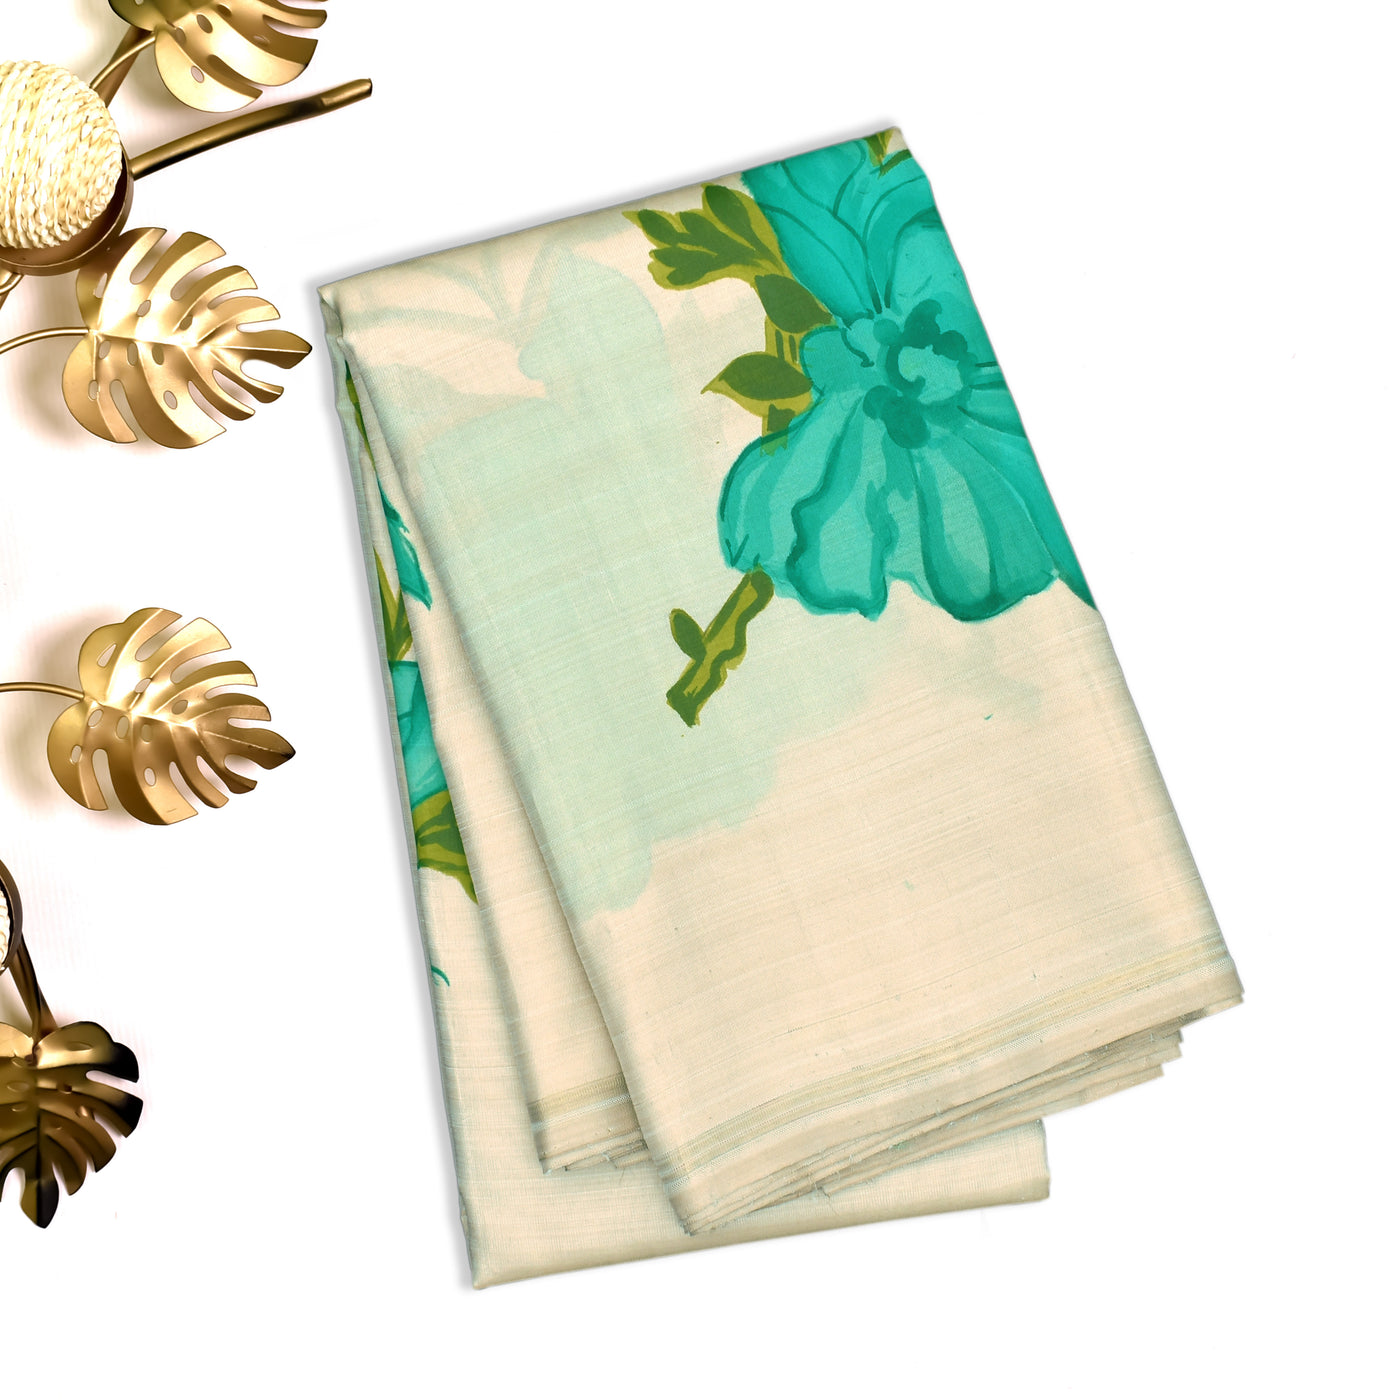 Off White Hand Painted Kanchi Silk Saree with Floral Painted Design